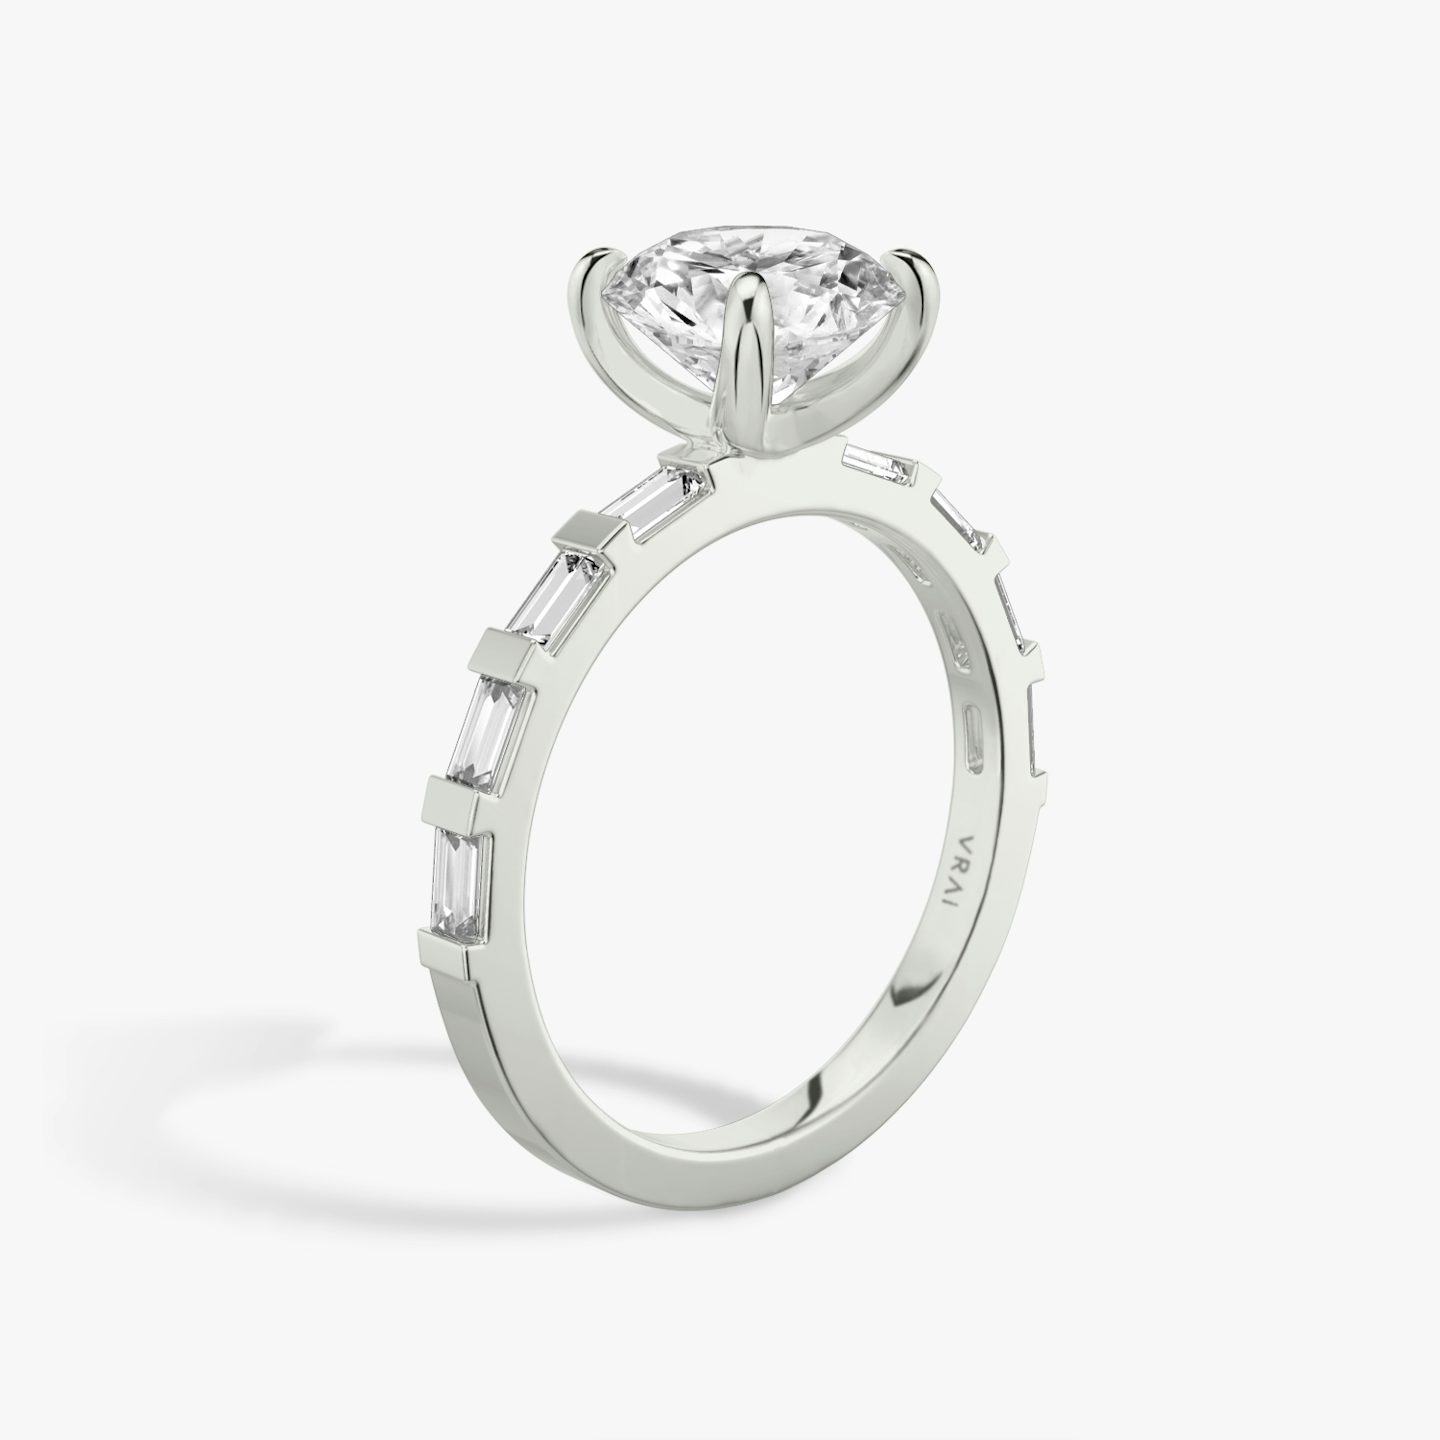 The Baguette Bar | Round Brilliant | 18k | 18k White Gold | Carat weight: See full inventory | Diamond orientation: vertical